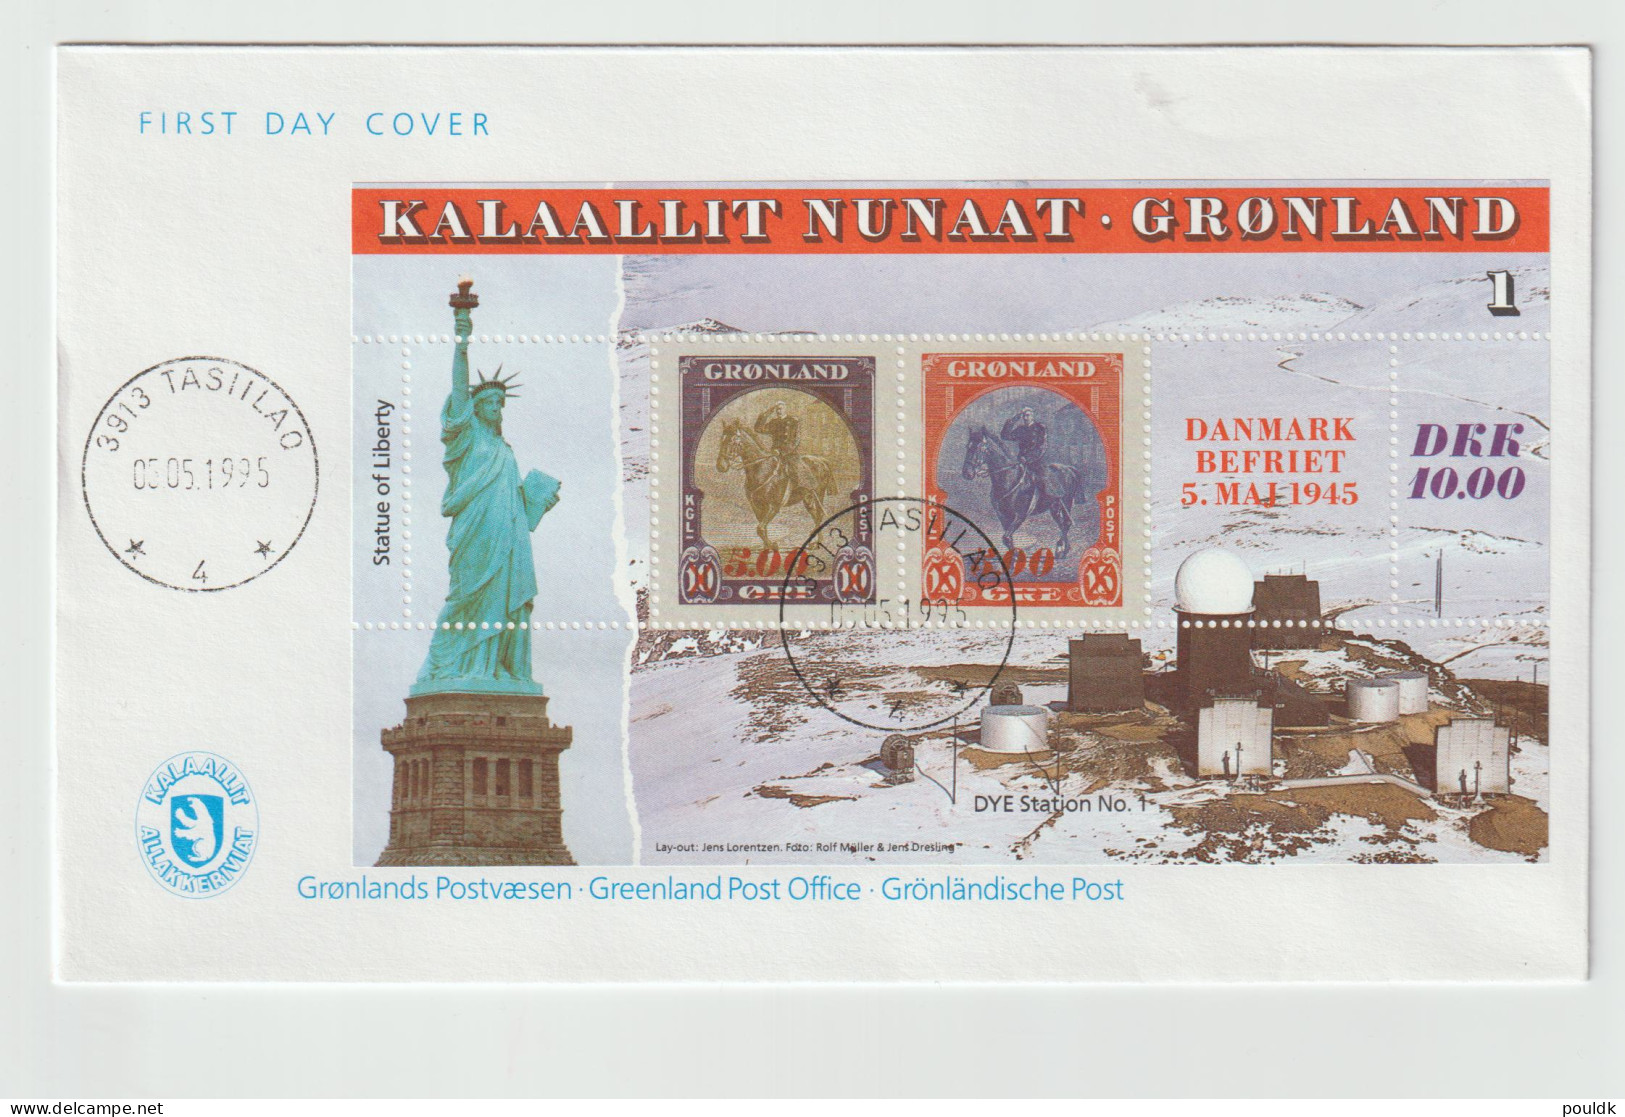 Greenland FDC 1995 Denmark Liberated Souvenir Sheet. Postal Weight Approx 40 Gramms. Please Read Sales Con - FDC